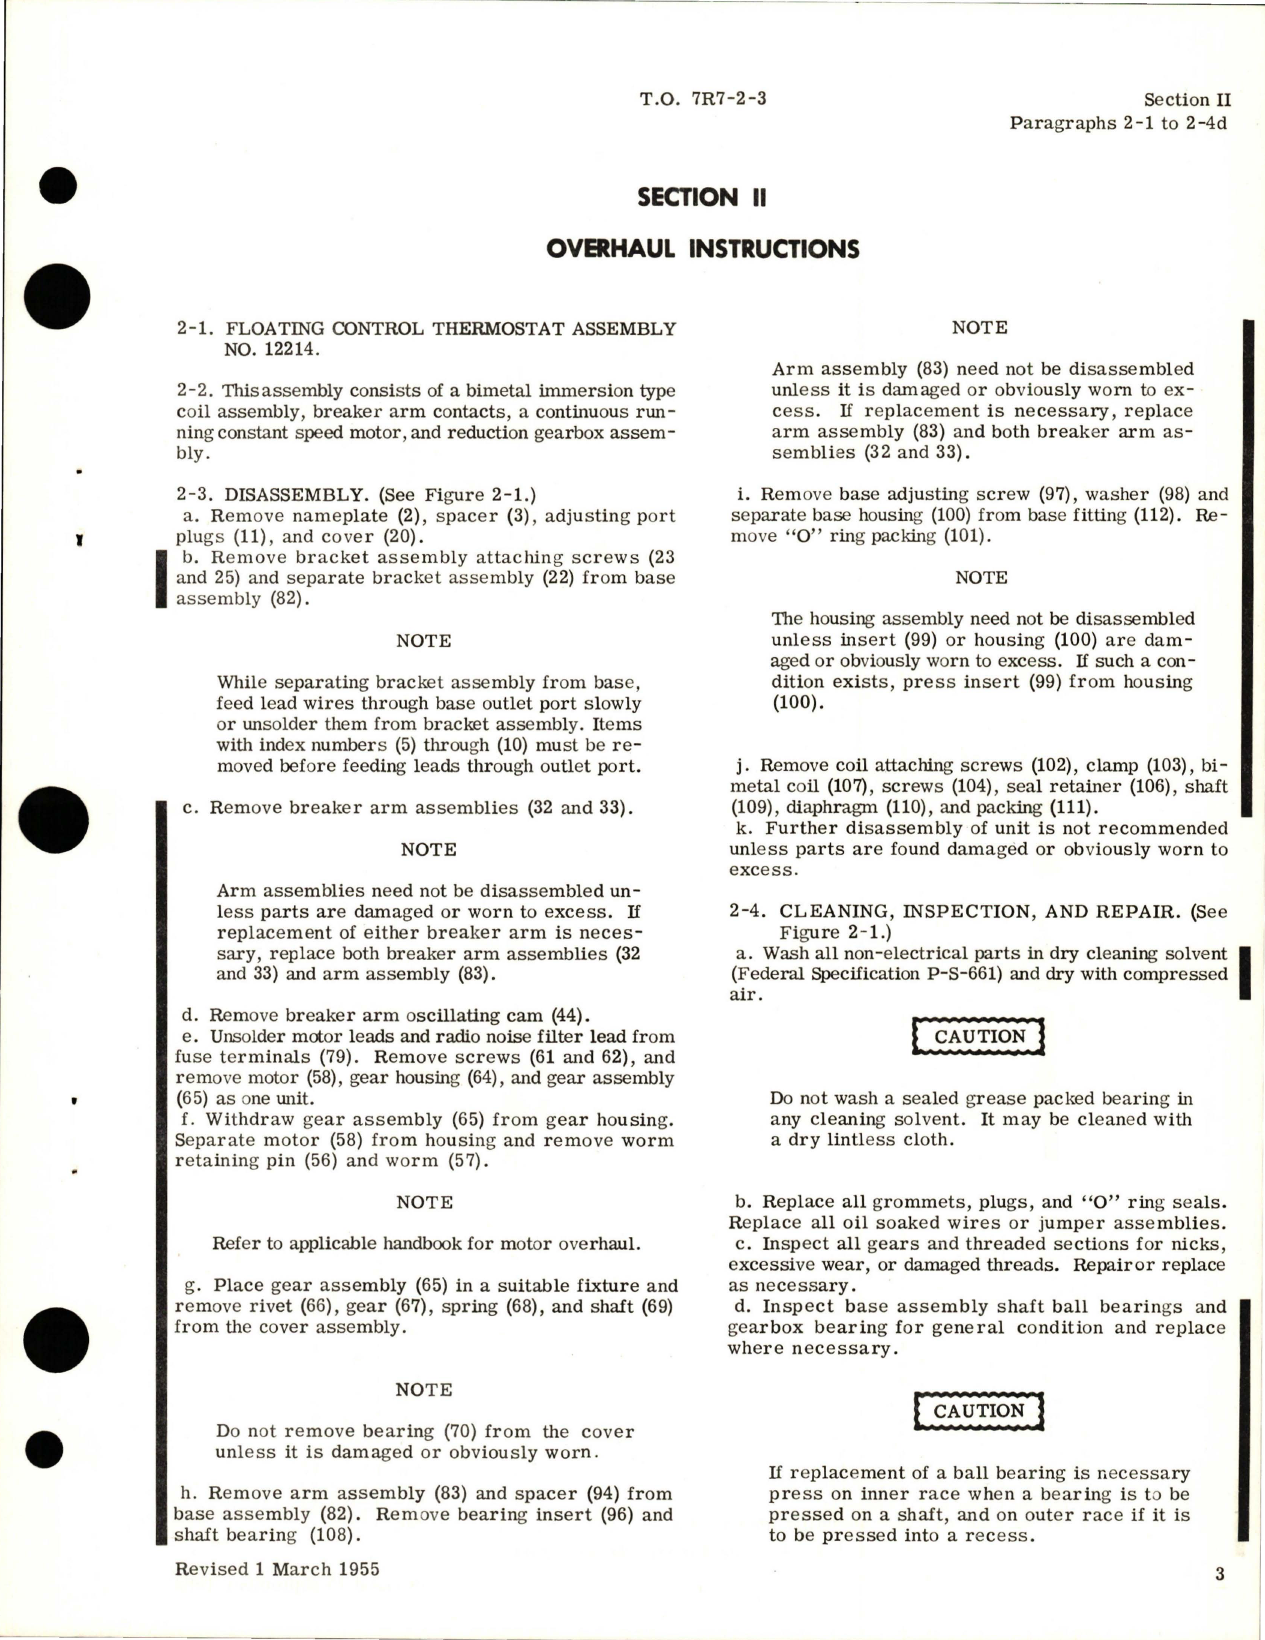 Sample page 7 from AirCorps Library document: Overhaul Instructions for Floating Control Thermostats